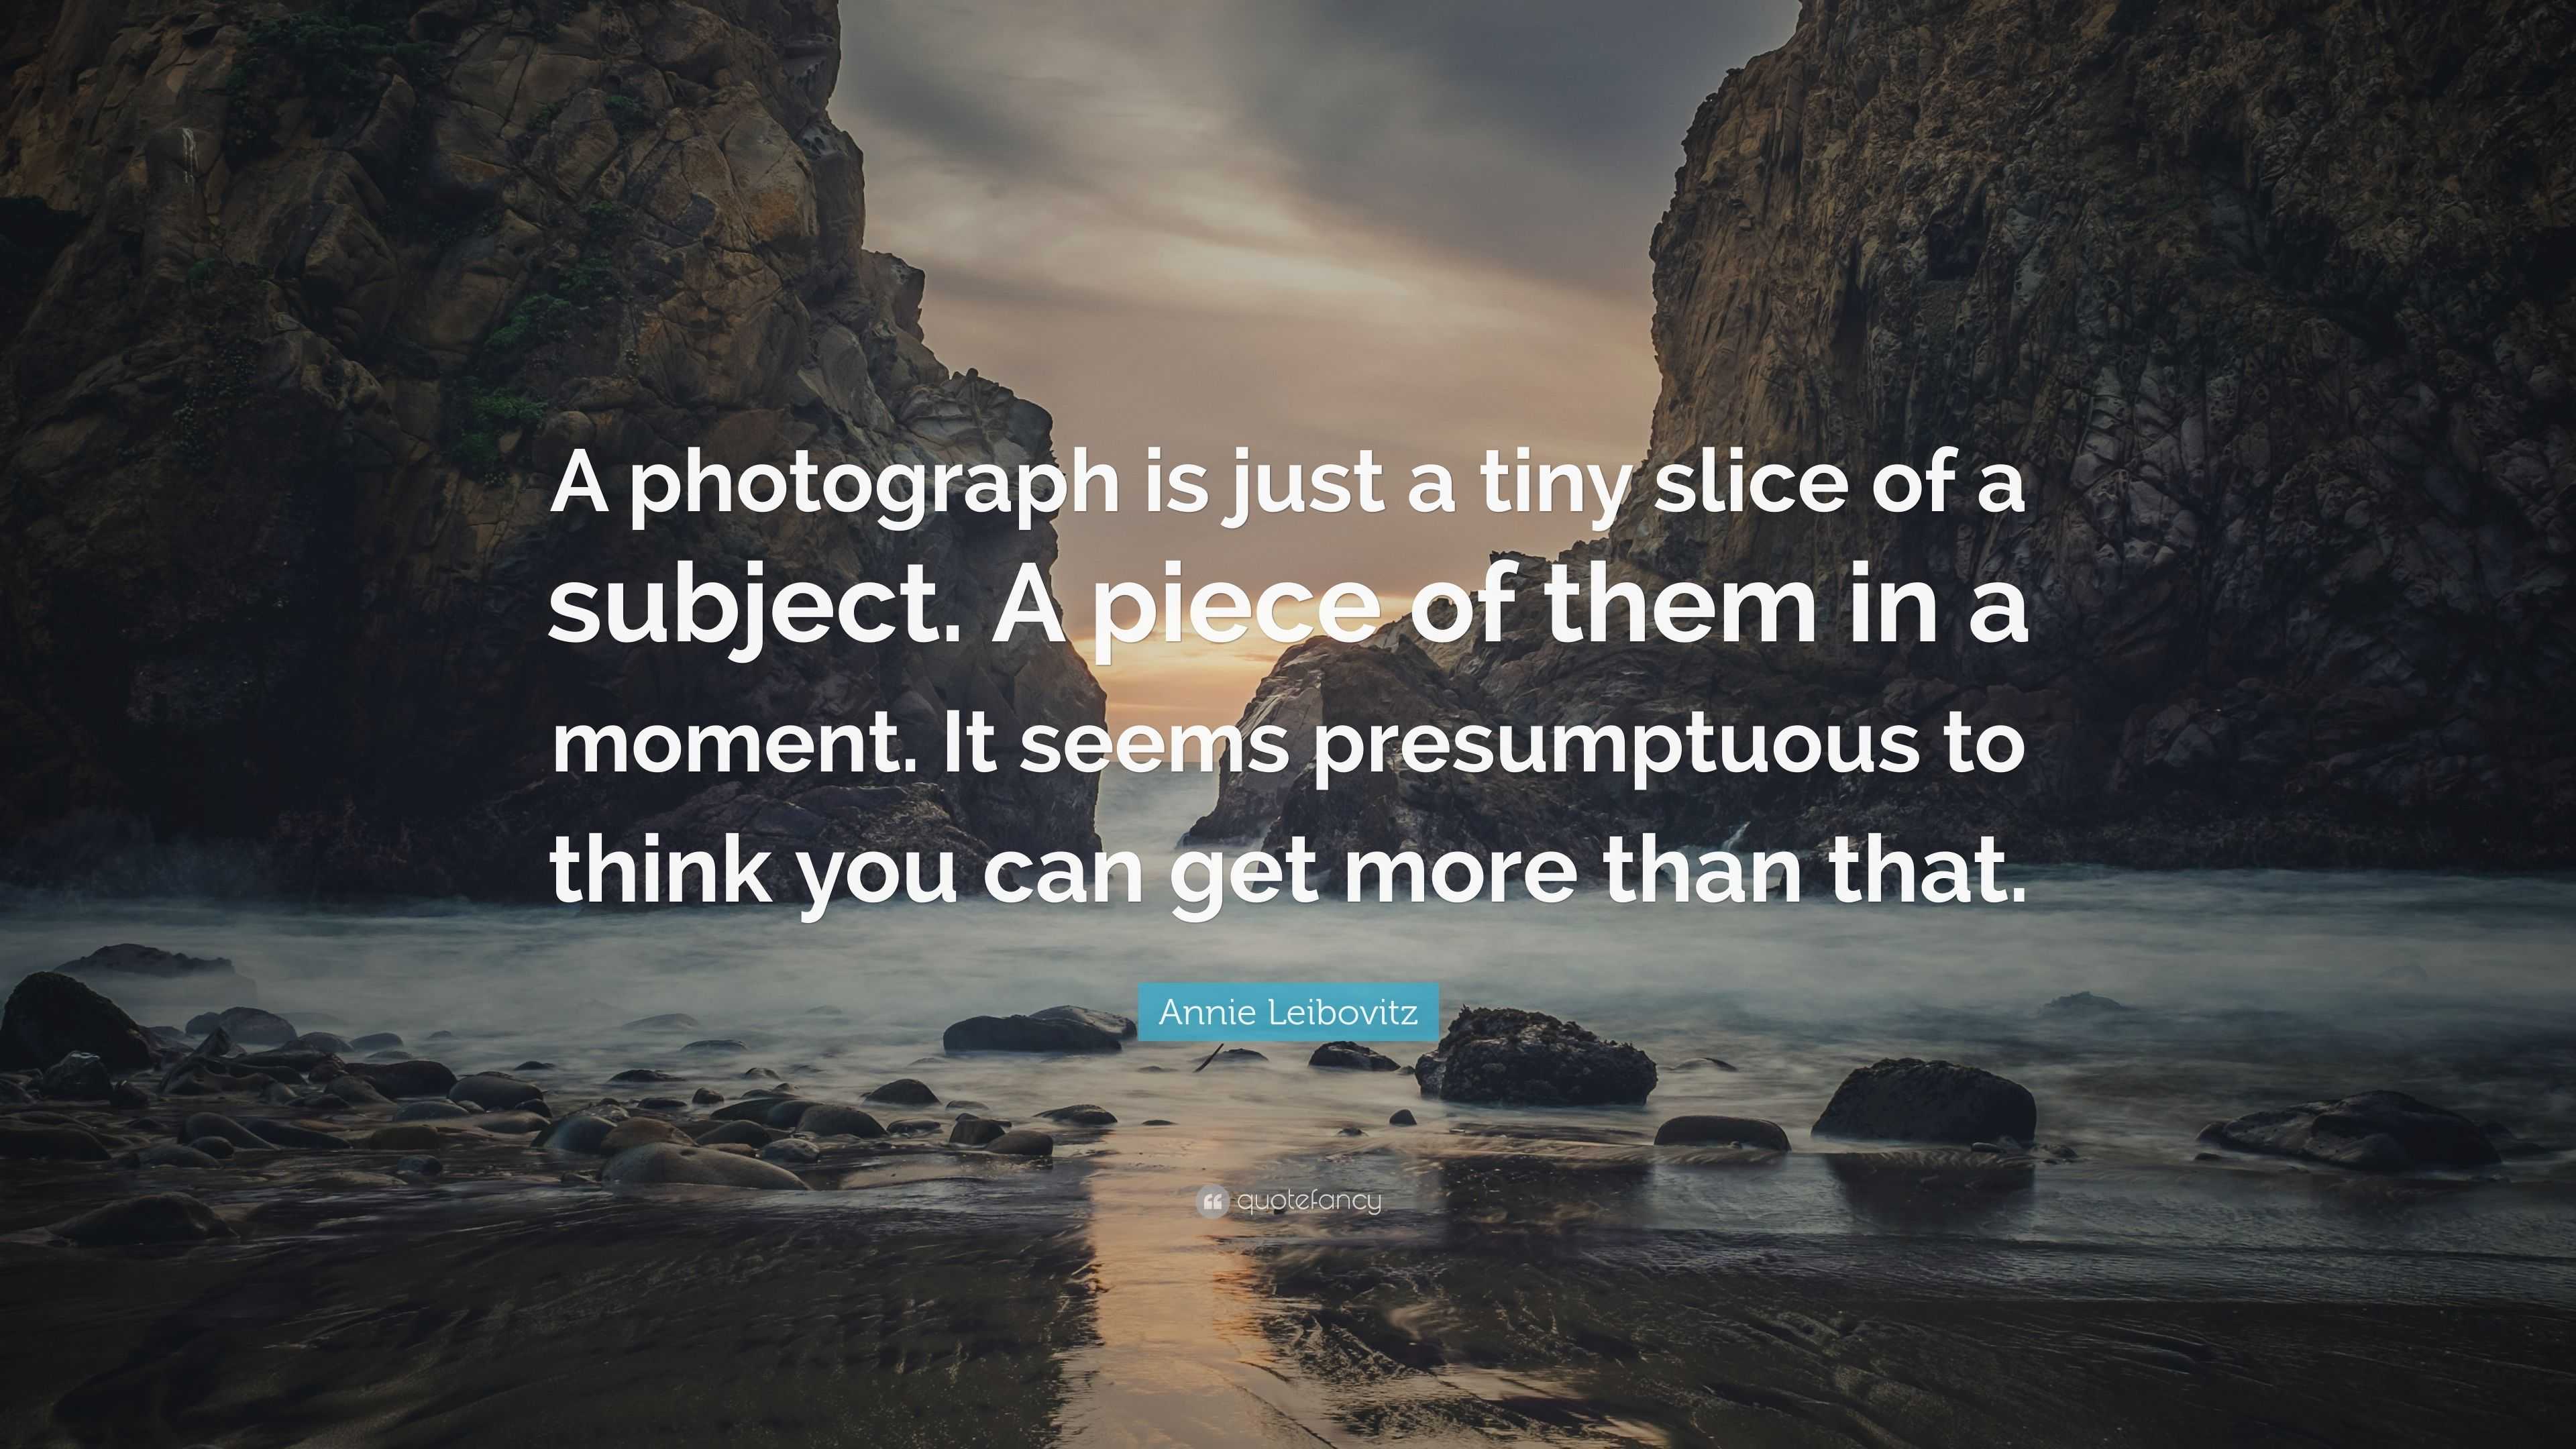 Annie Leibovitz Quote: “A photograph is just a tiny slice of a subject ...